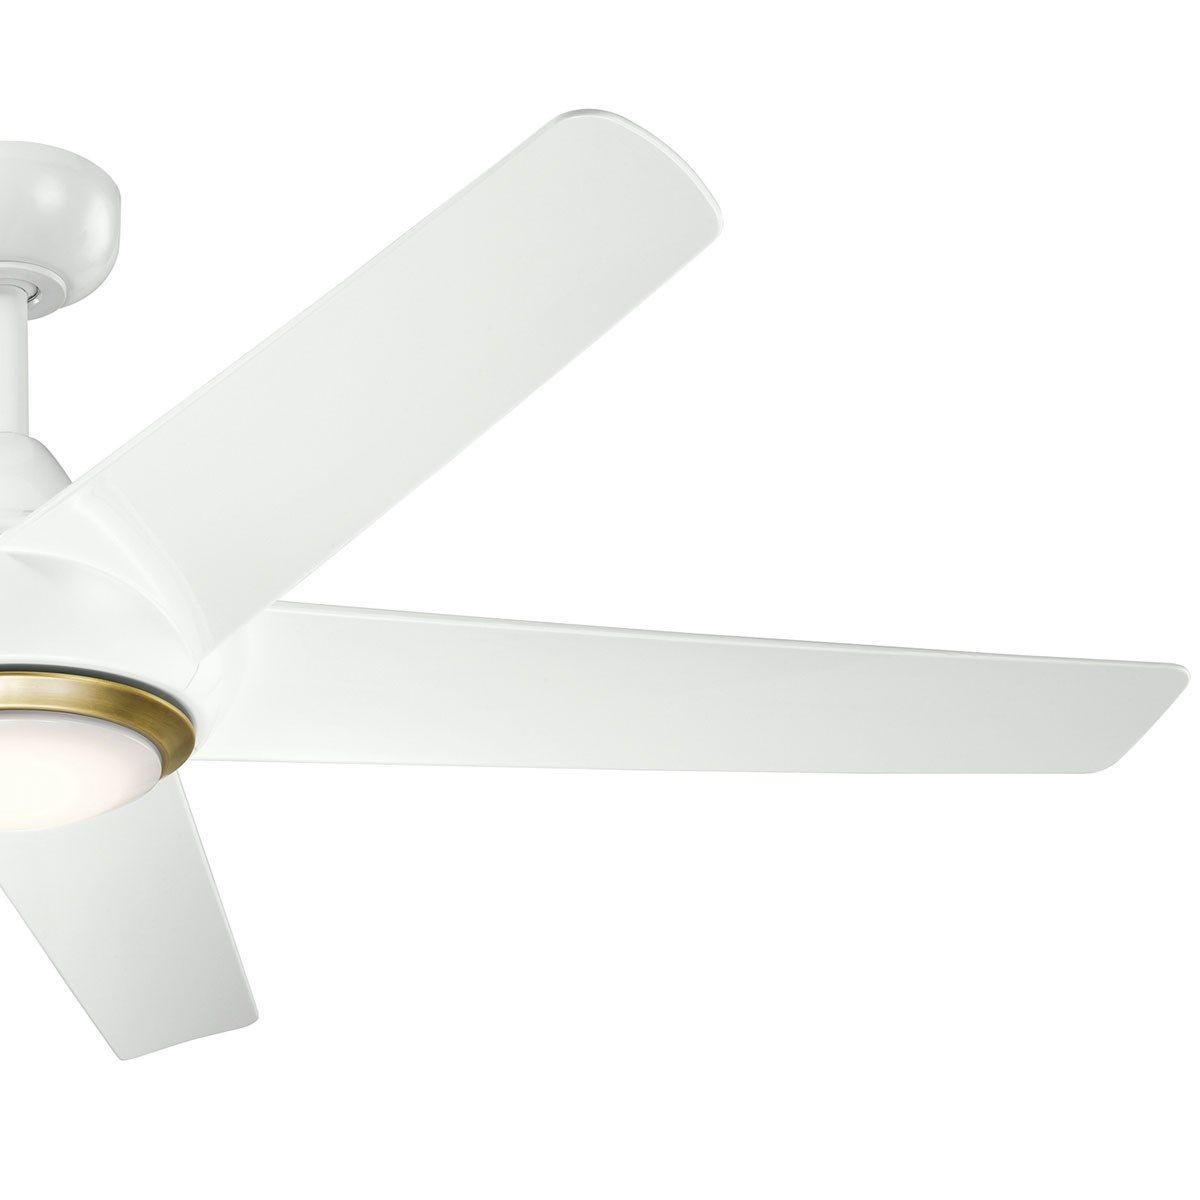 Kapono 52 Inch Modern Ceiling Fan With Light And Remote